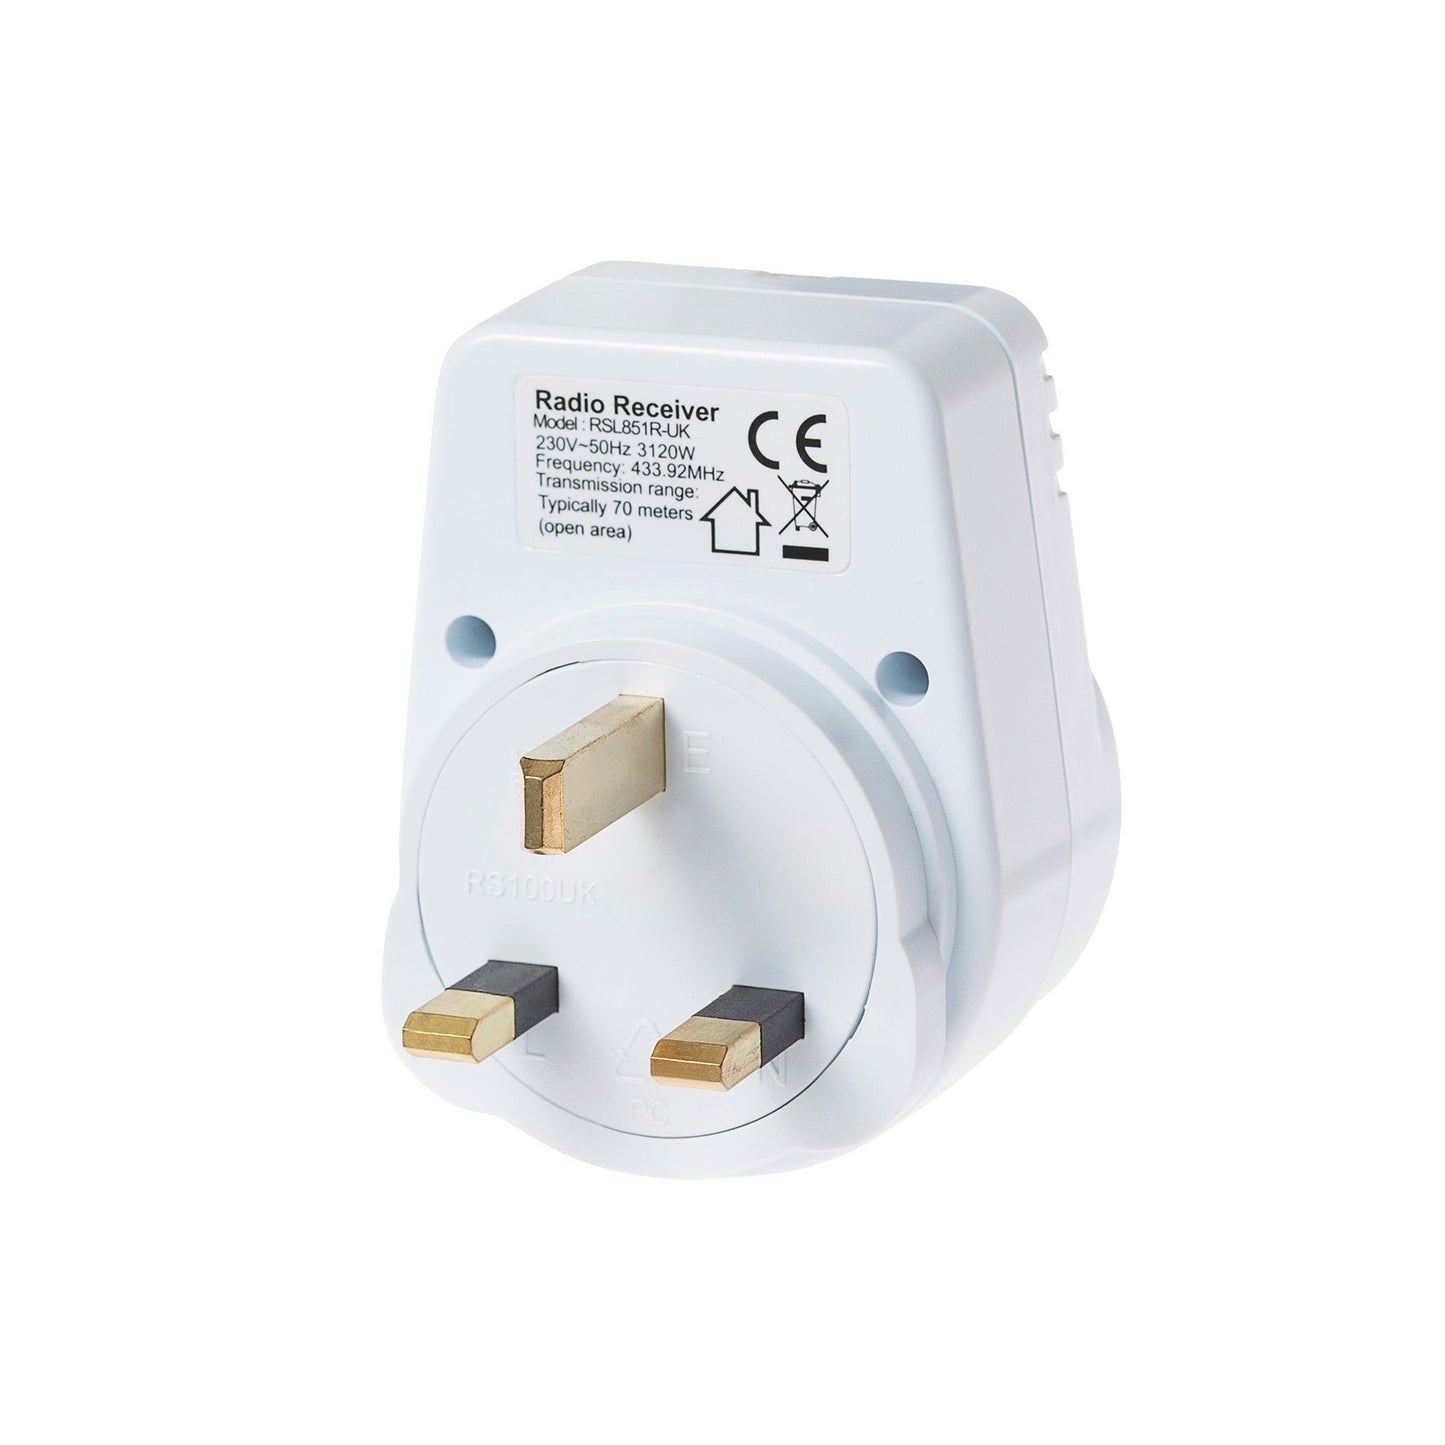 Maplin ORB RF Remote Controlled Mains Plug Socket with 1 Remote Version S2 - White - maplin.co.uk